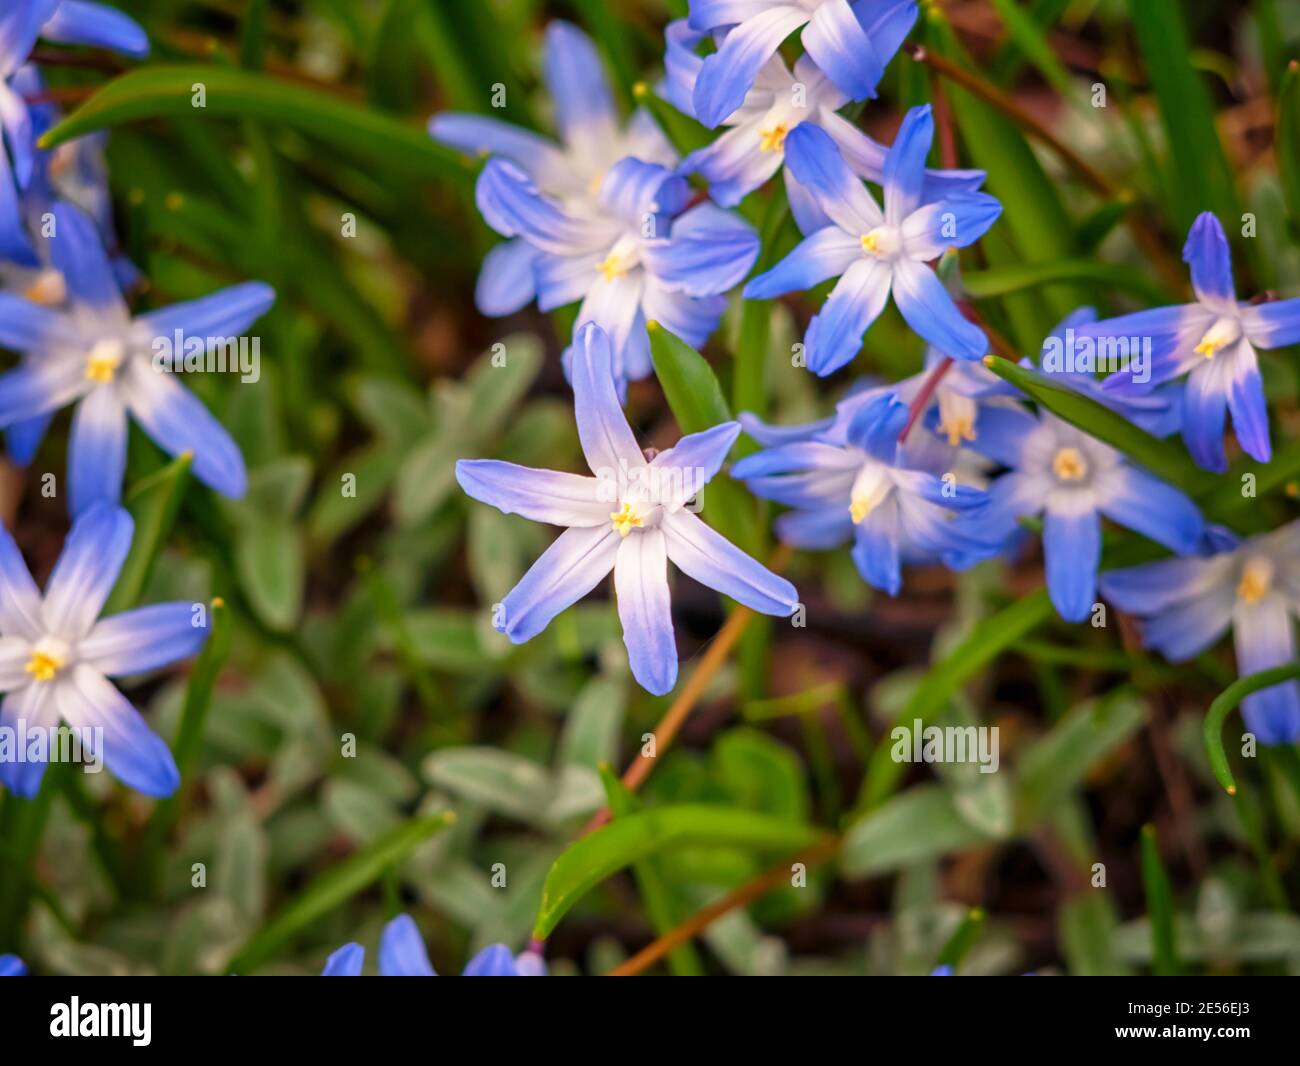 Chionodoxa luciliae, the Bossier's glory-of-the-snow, Lucile's glory-of-the-snow. Flowers for the garden, parks, landscape design, delighted attractiv Stock Photo